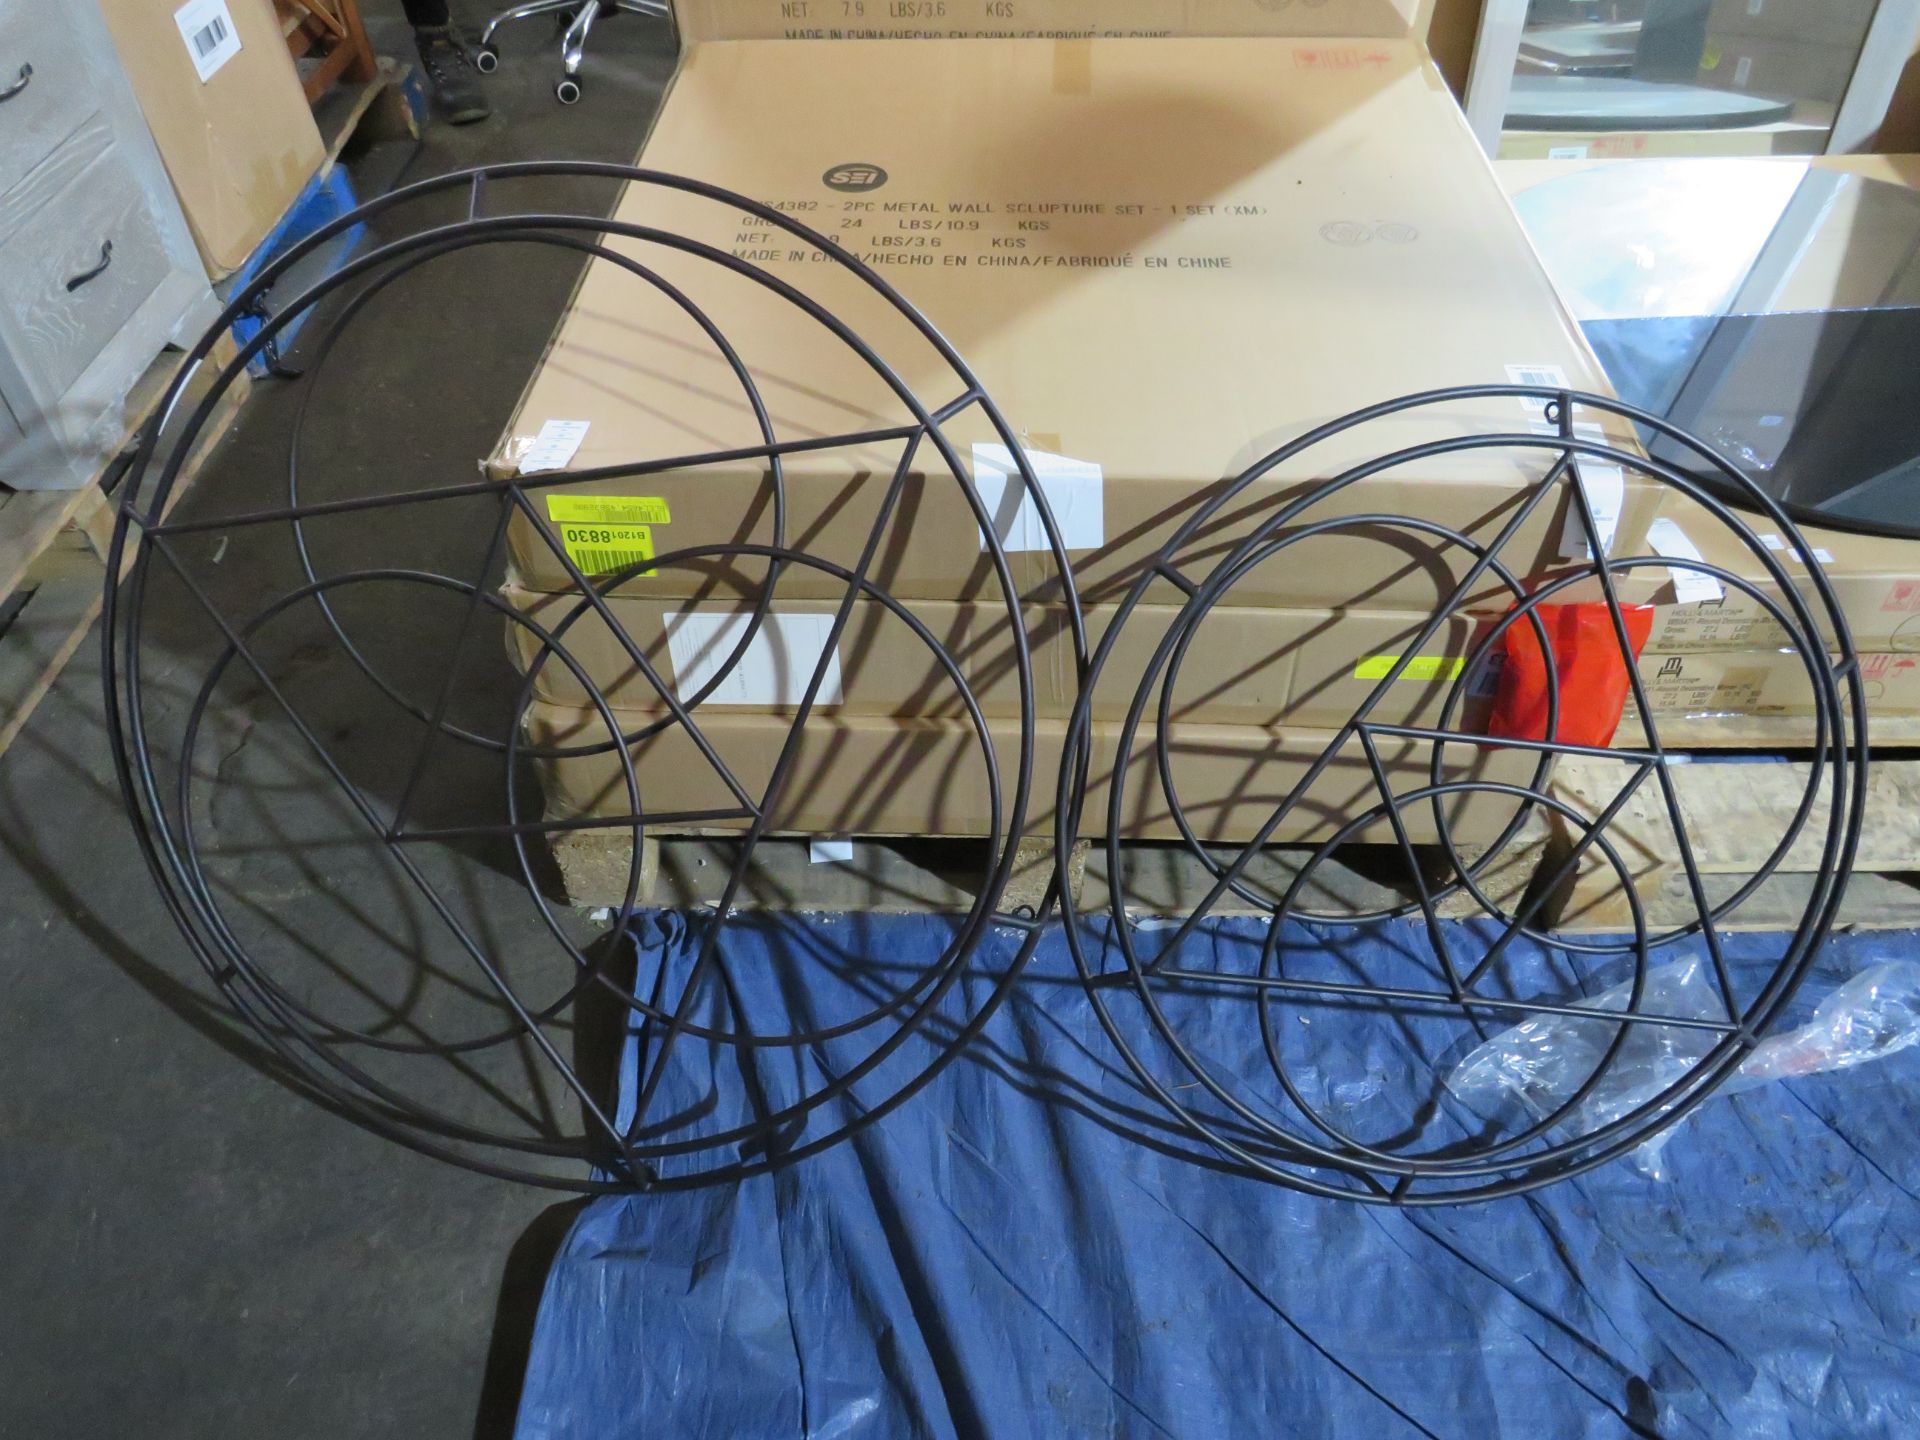 SEI Furniture 2Pc Metal Wall Sculpture Set (NEW)RRP 151.99 This item looks to be in good condition